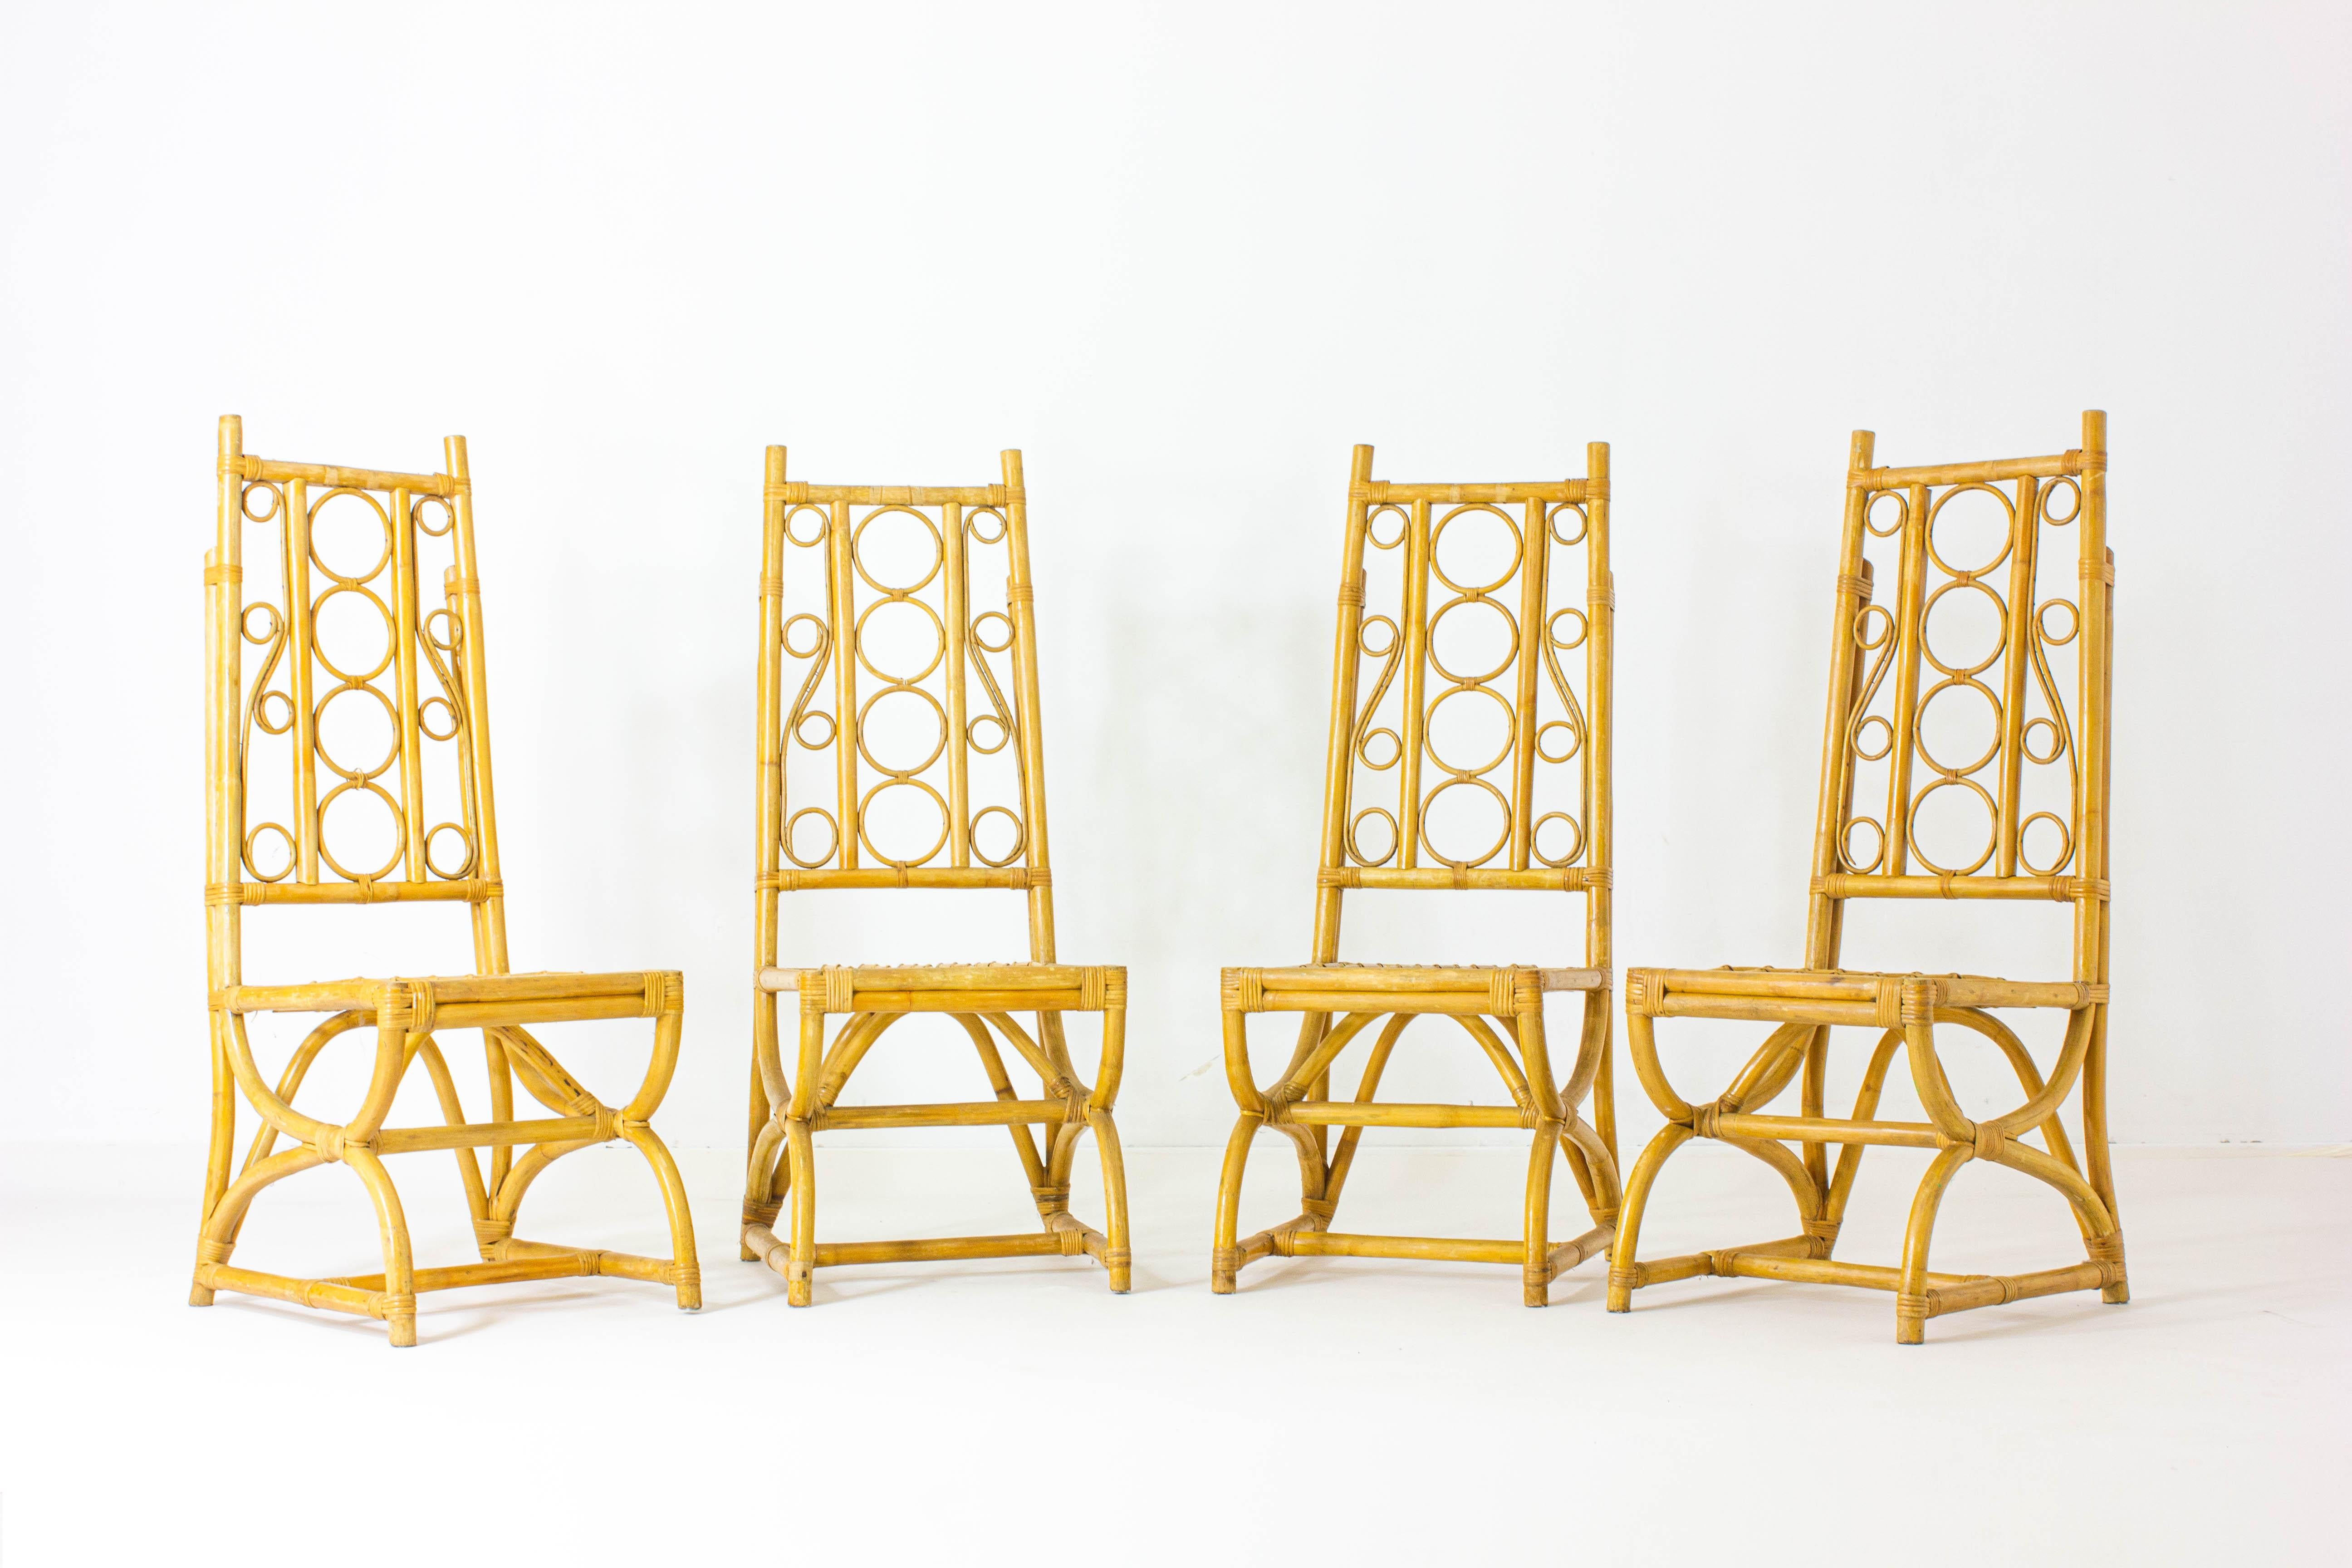 Belgian Set of 4 tropically ornate bamboo chairs. For Sale